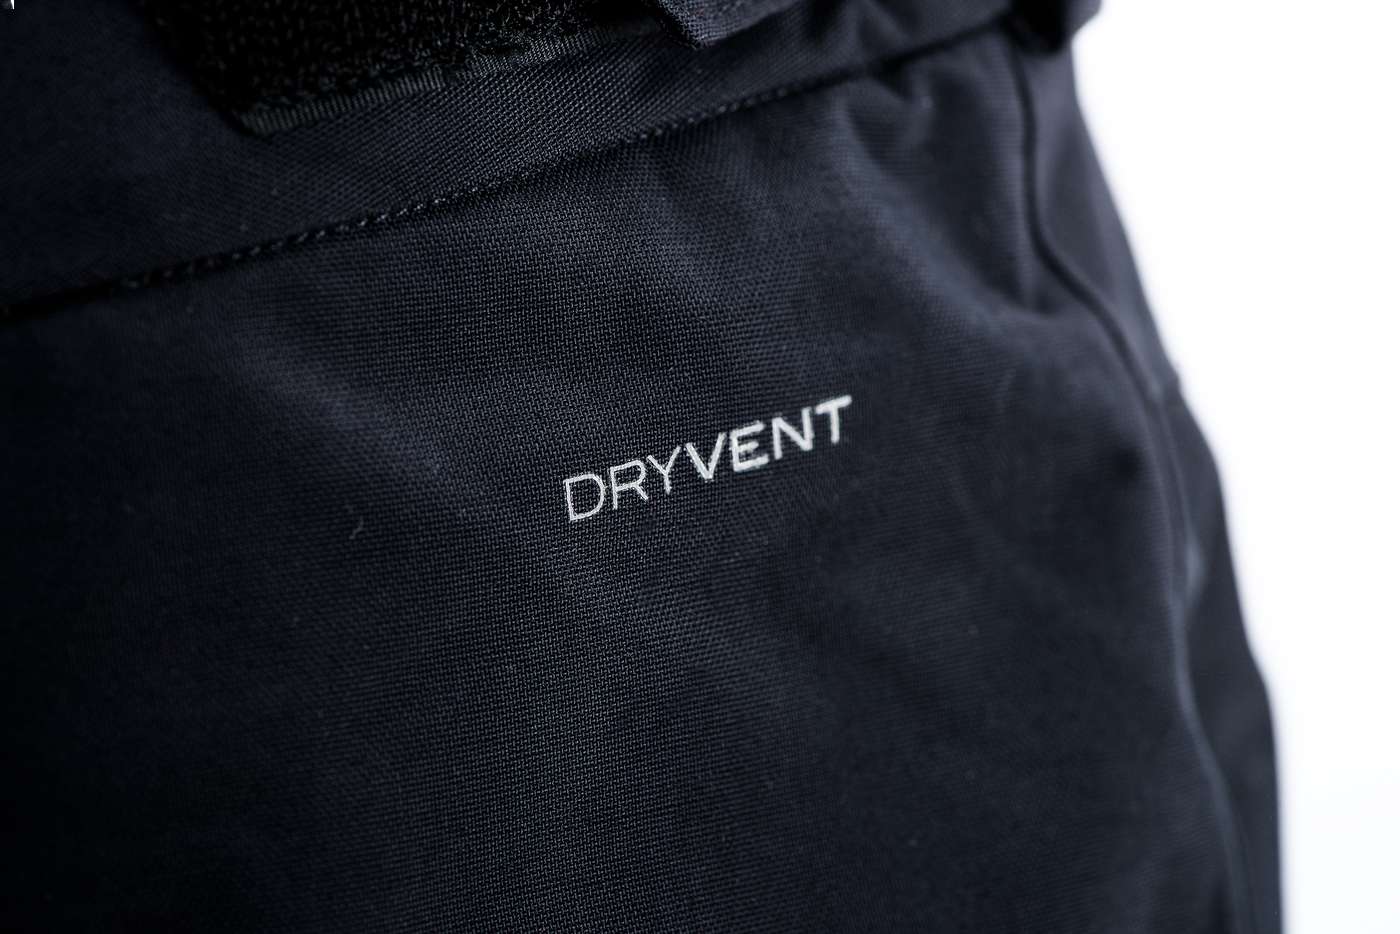 The north face dryvent